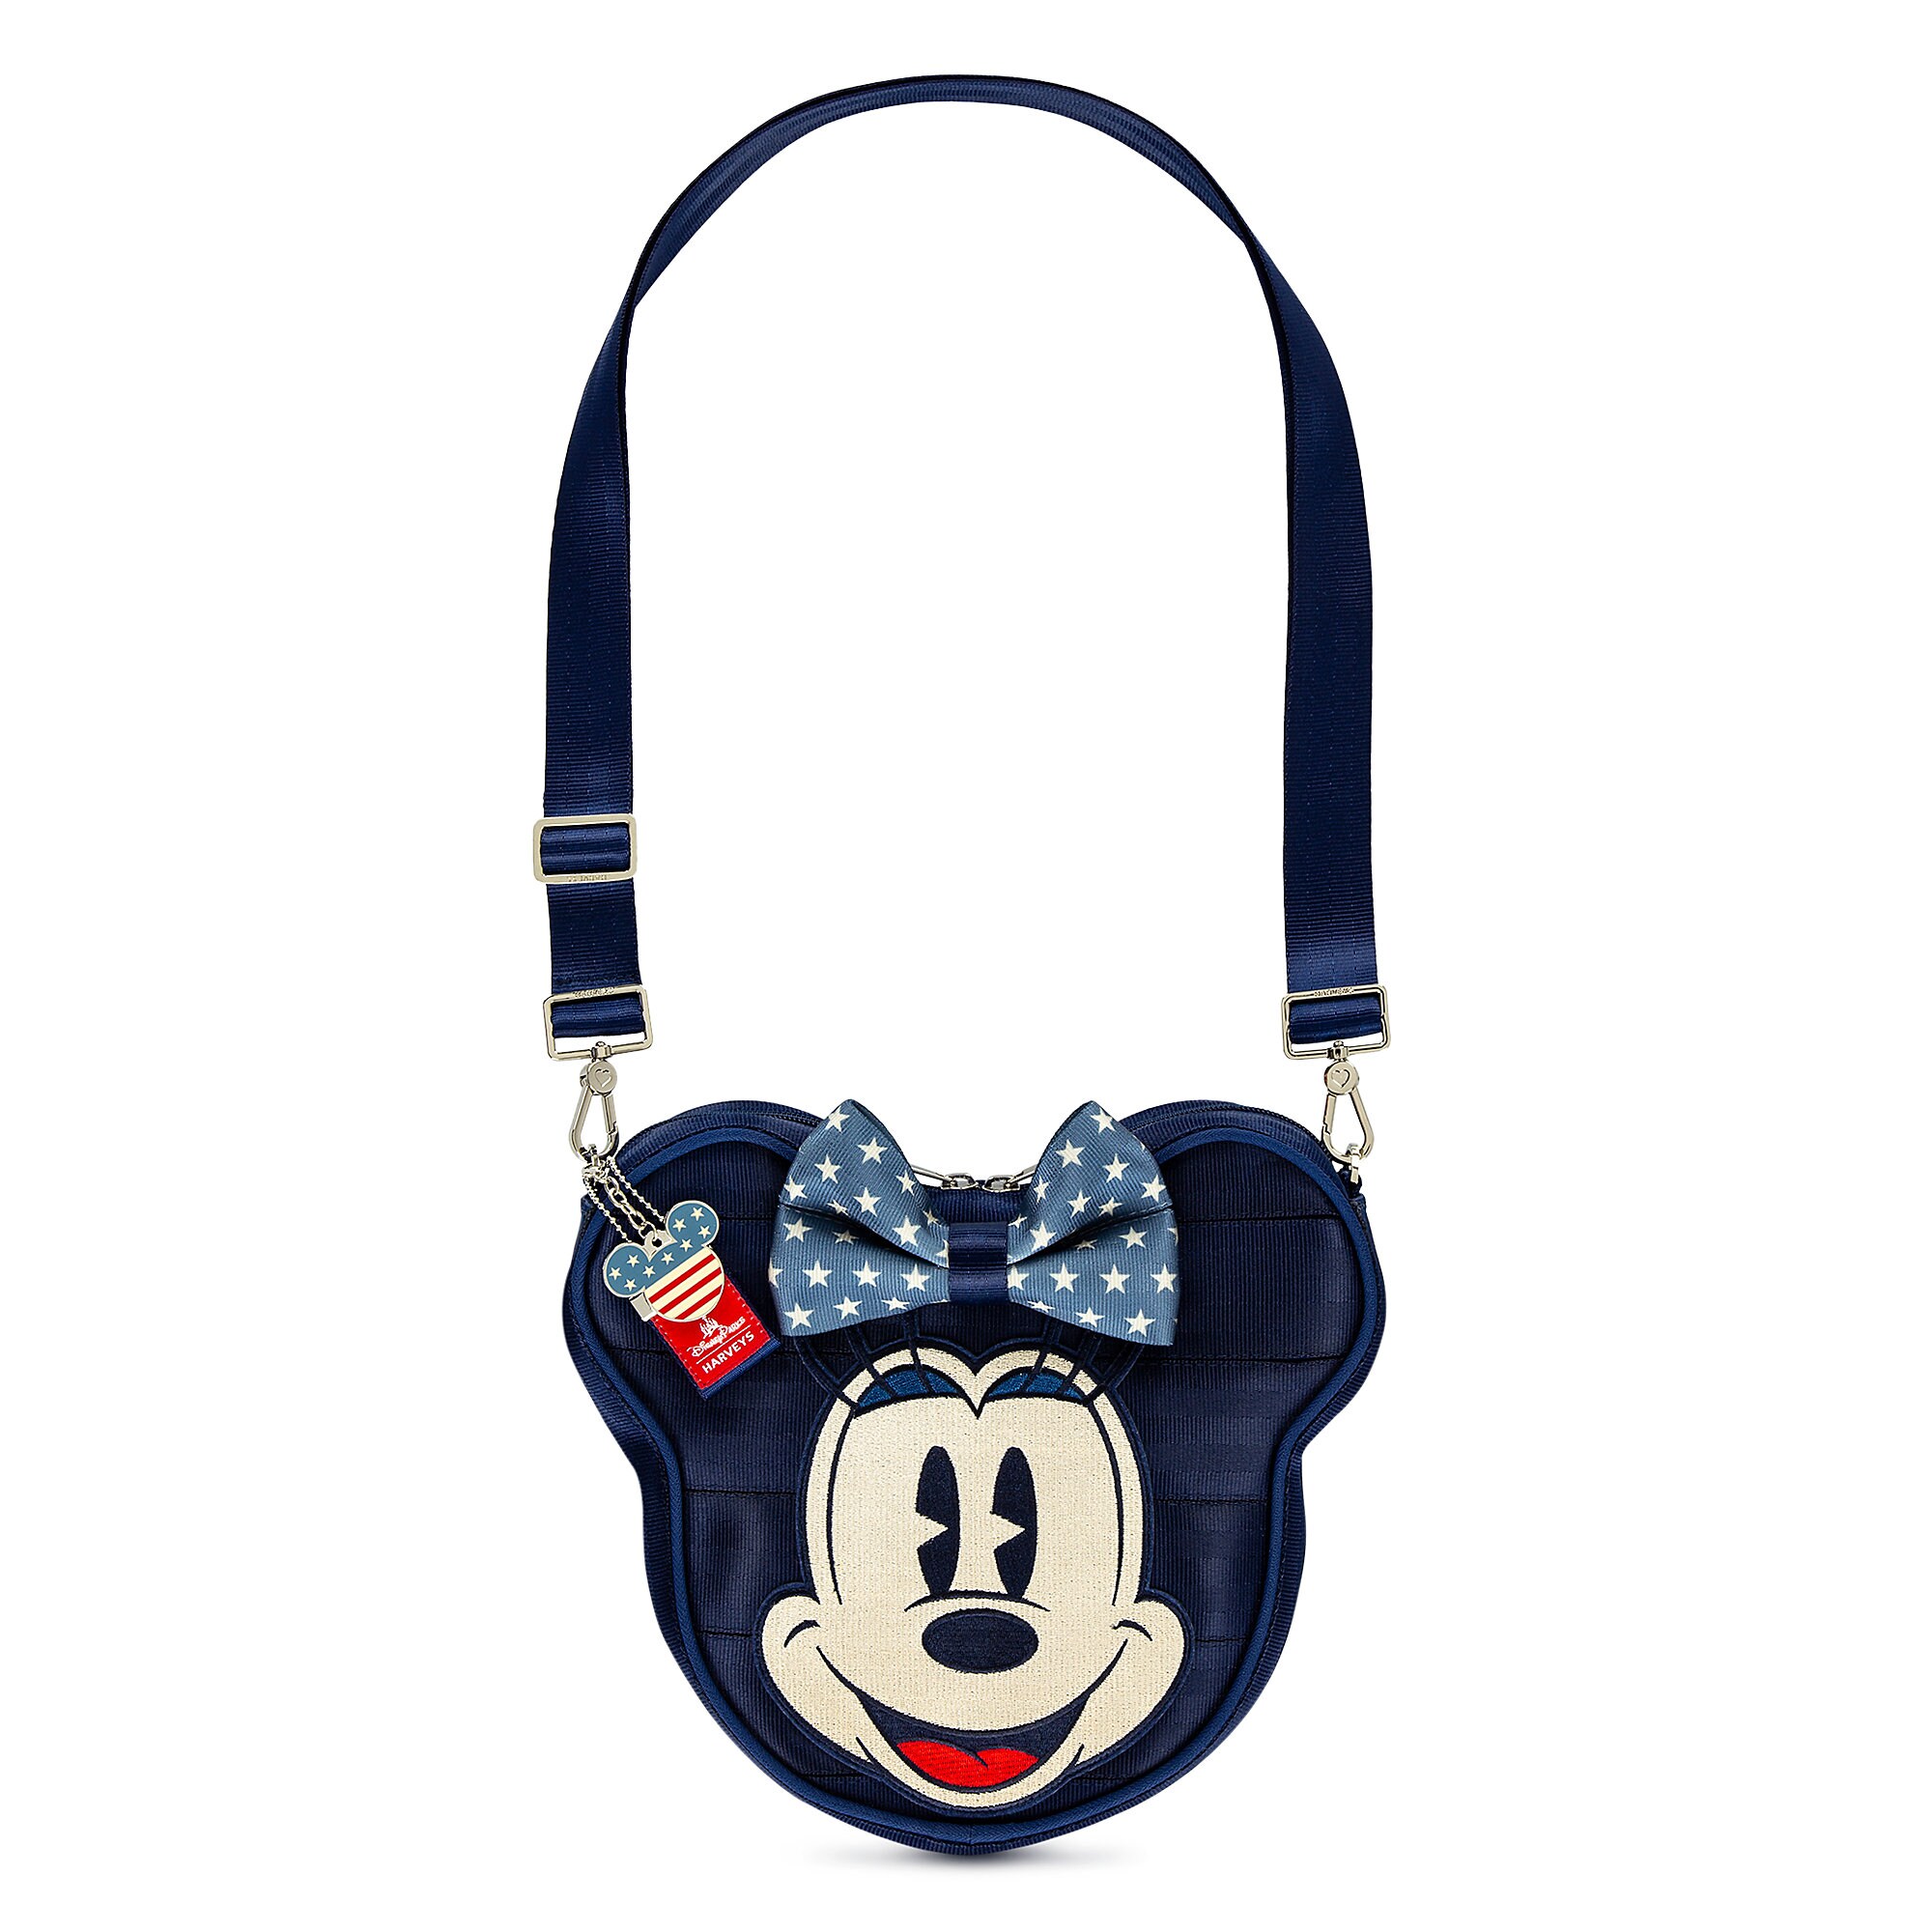 Mickey and Minnie Mouse Americana Crossbody Bag by Harveys now available – Dis Merchandise News